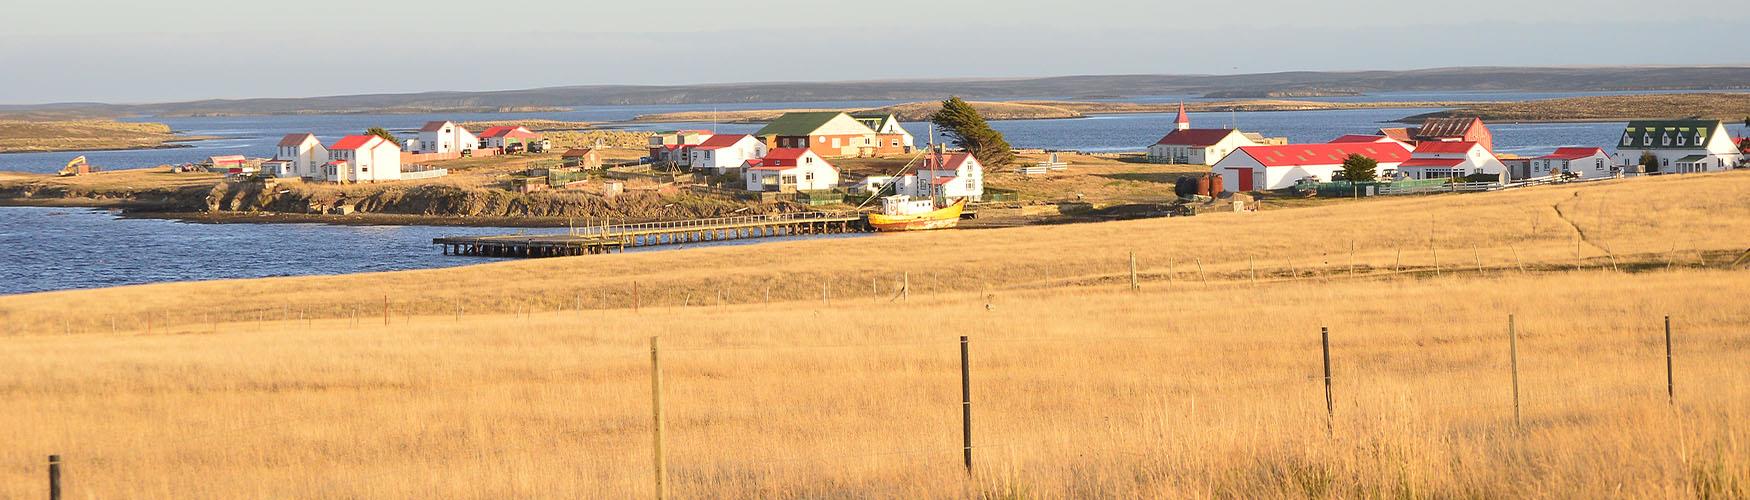 Goose Green located on the East Falkland and one of the largest settlements on East Falklands, Falkland Islands